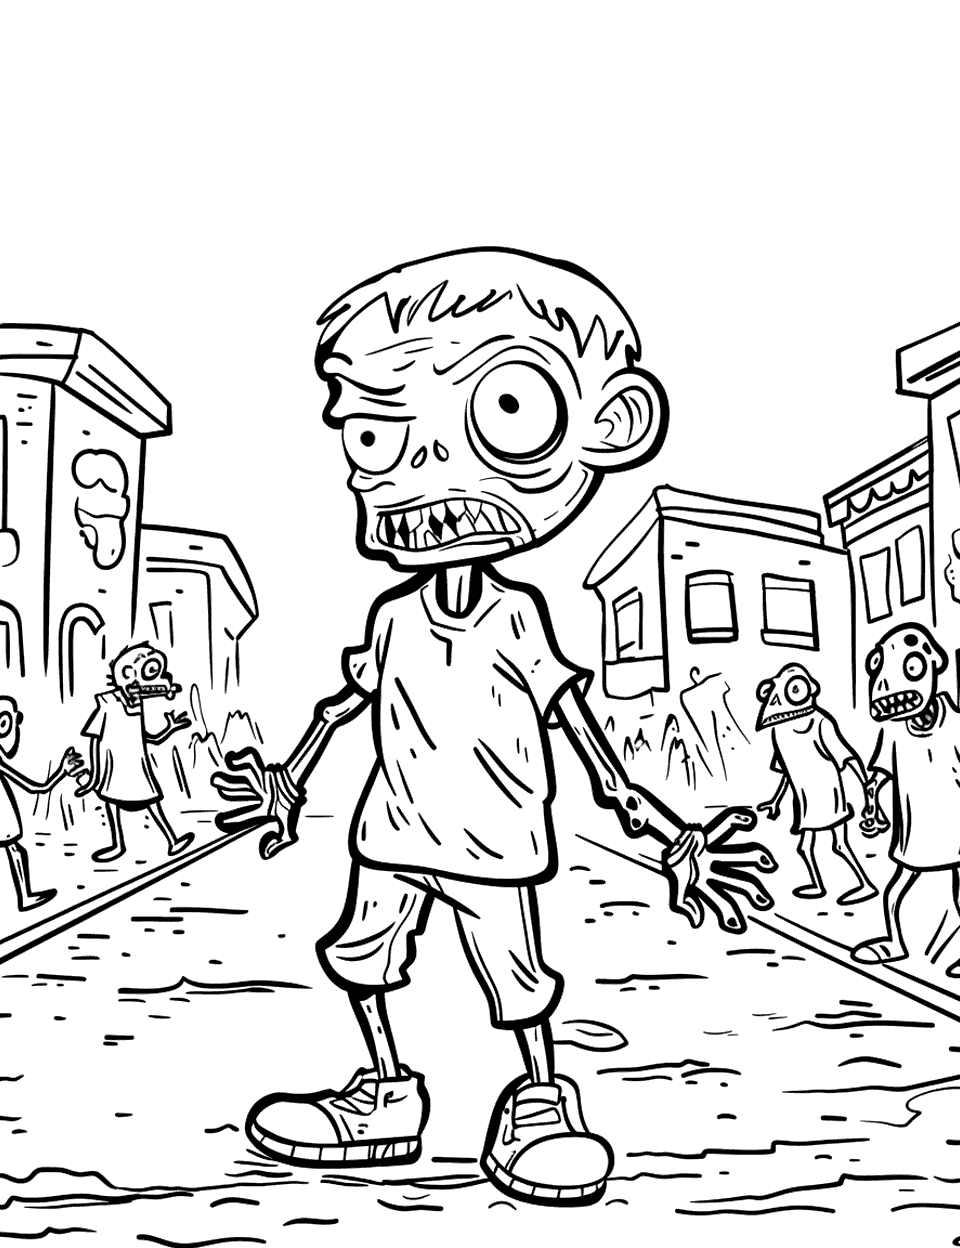 Zombie Outbreak in the City Coloring Page - Zombies wandering through the streets of a deserted city.